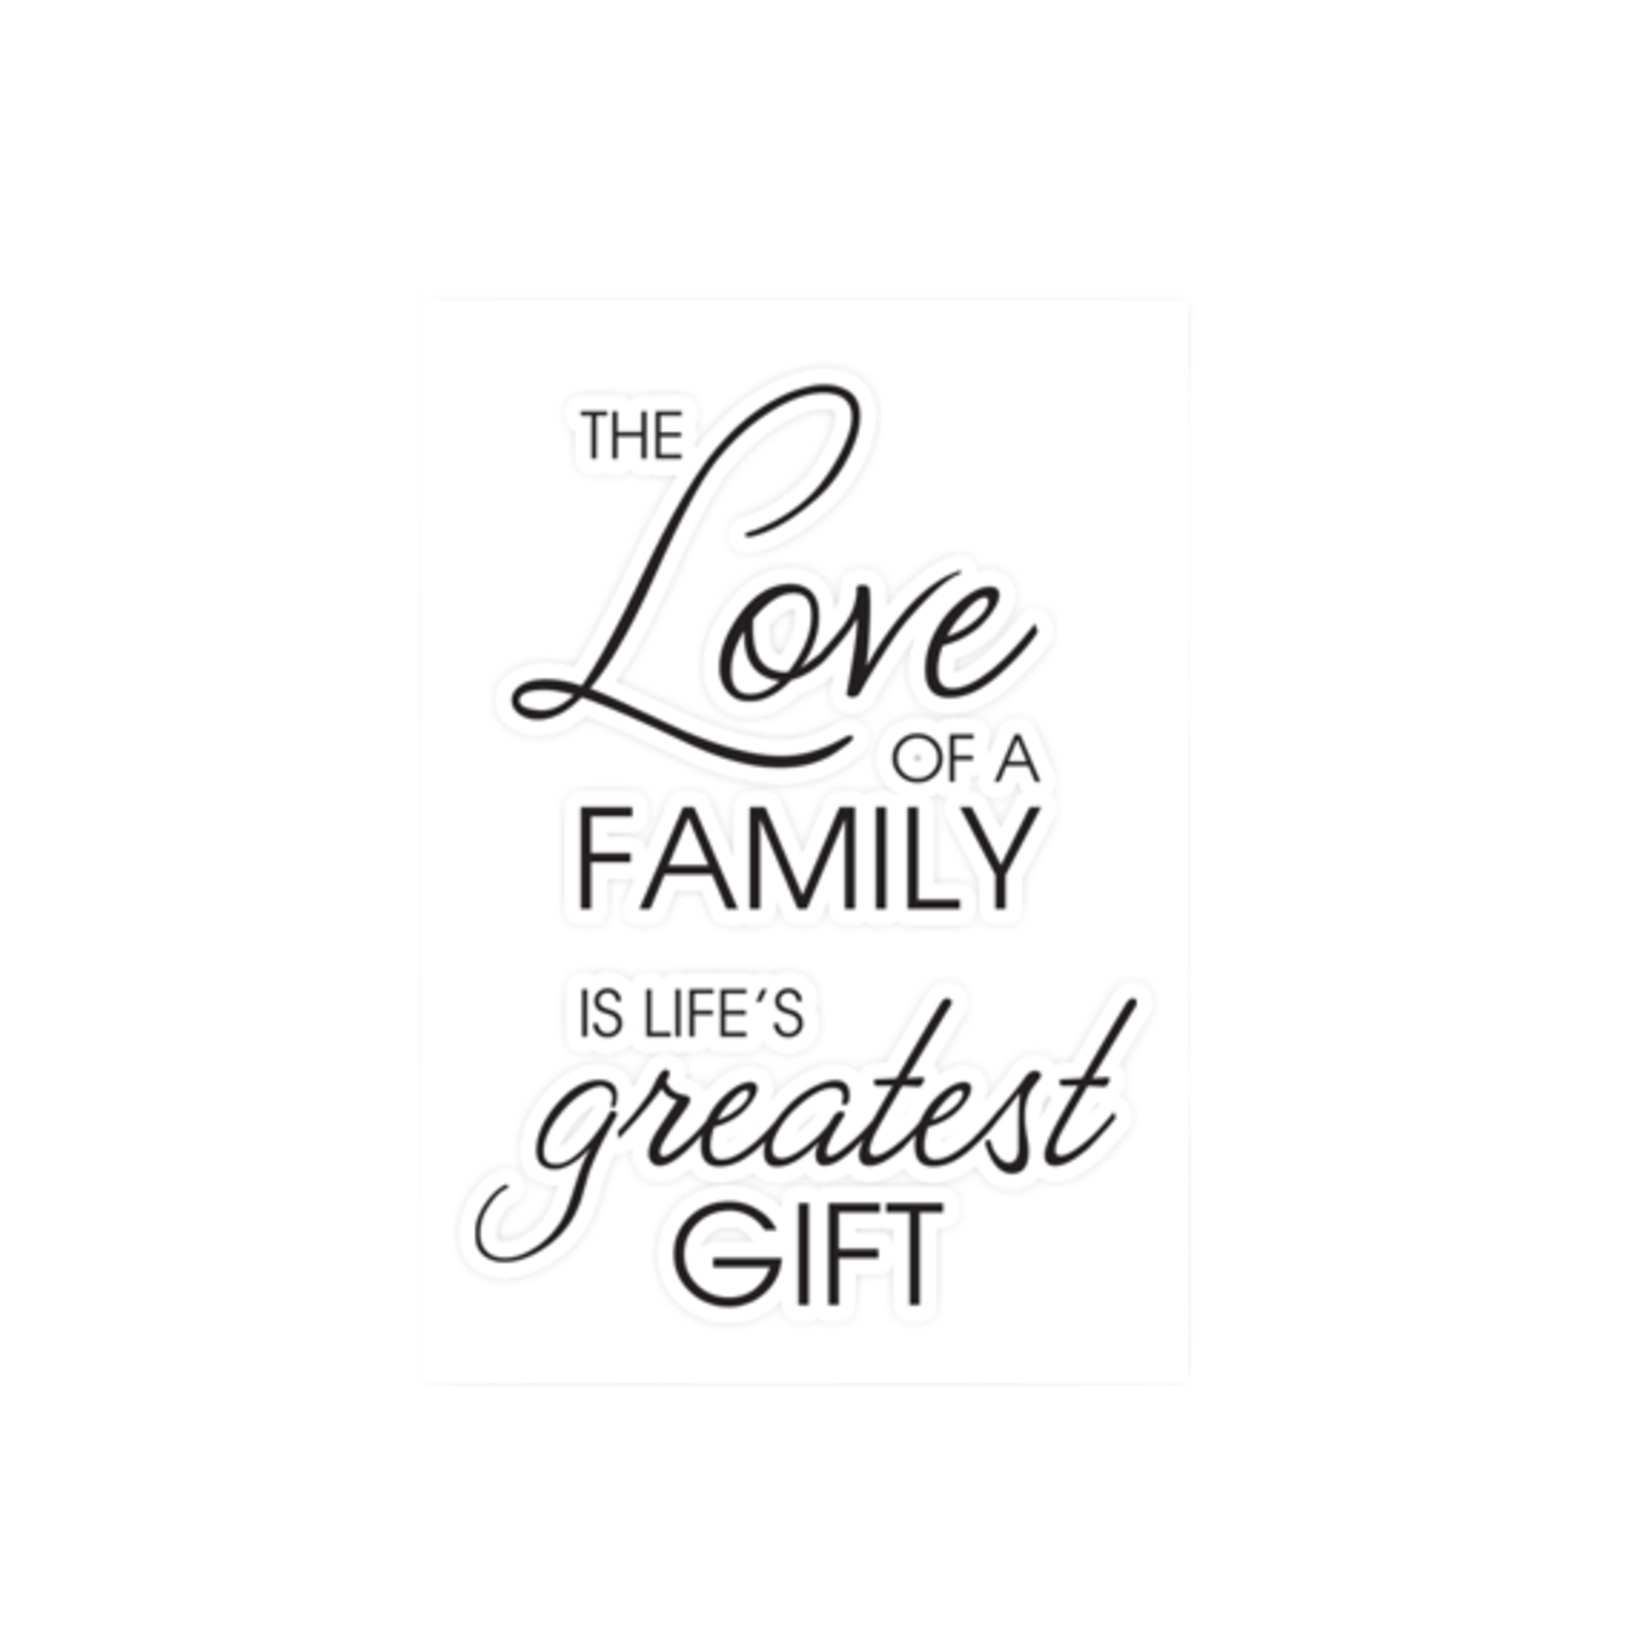 WORDS TO LIVE BY WALL ART -  THE LOVE OF A FAMILY